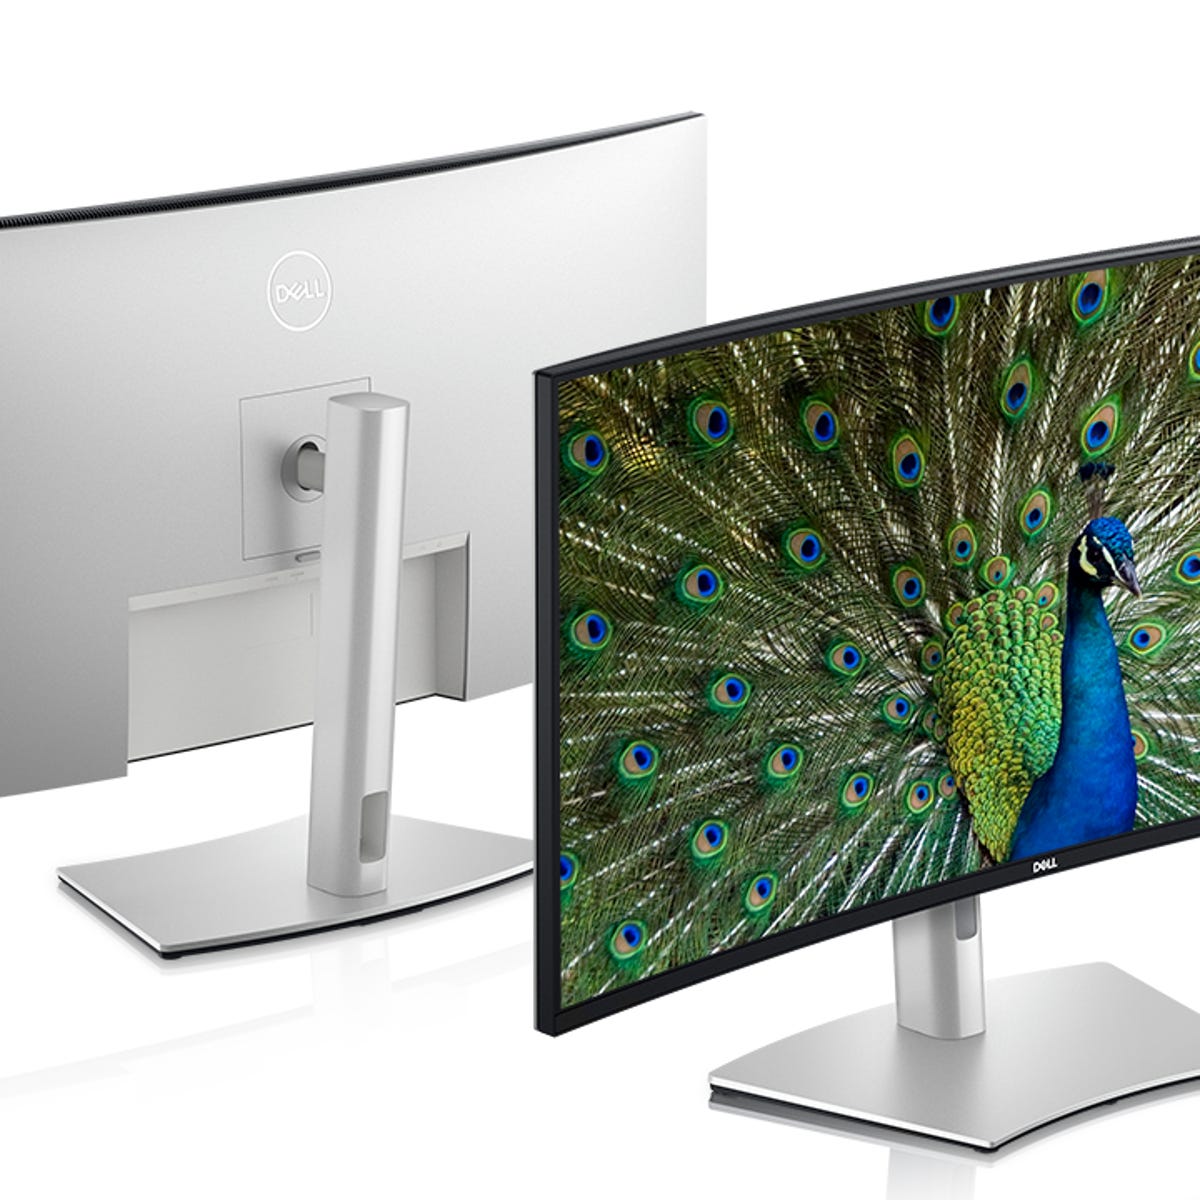 Dell's monitors for 2021 tackle working from home and remote schooling -  CNET